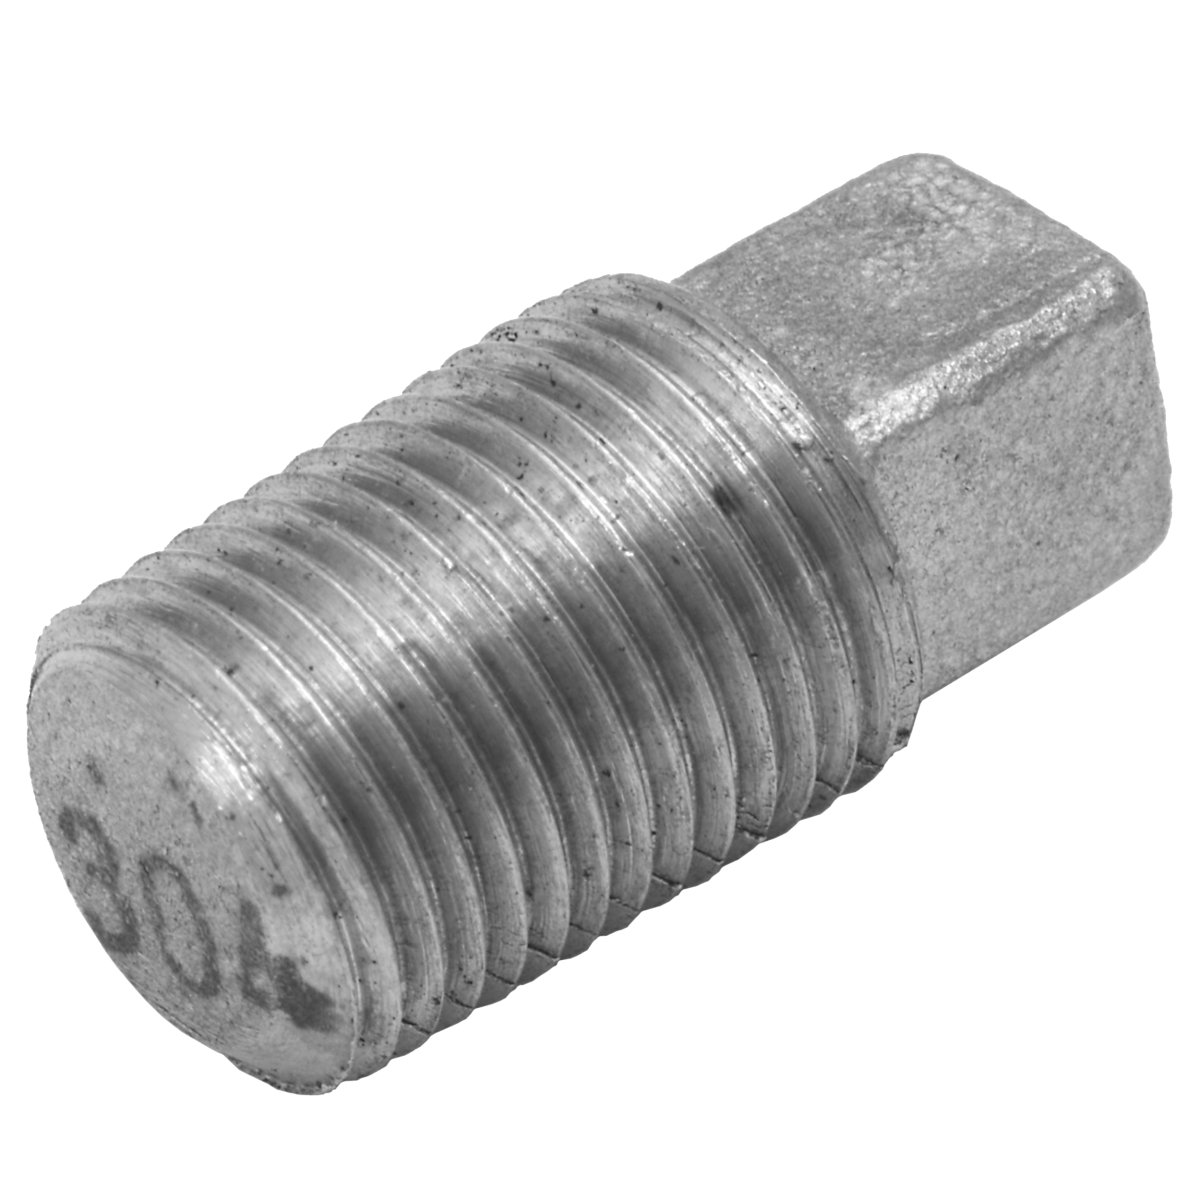 304 Stainless Steel Pipe Fitting 3/4" Square Head Plug